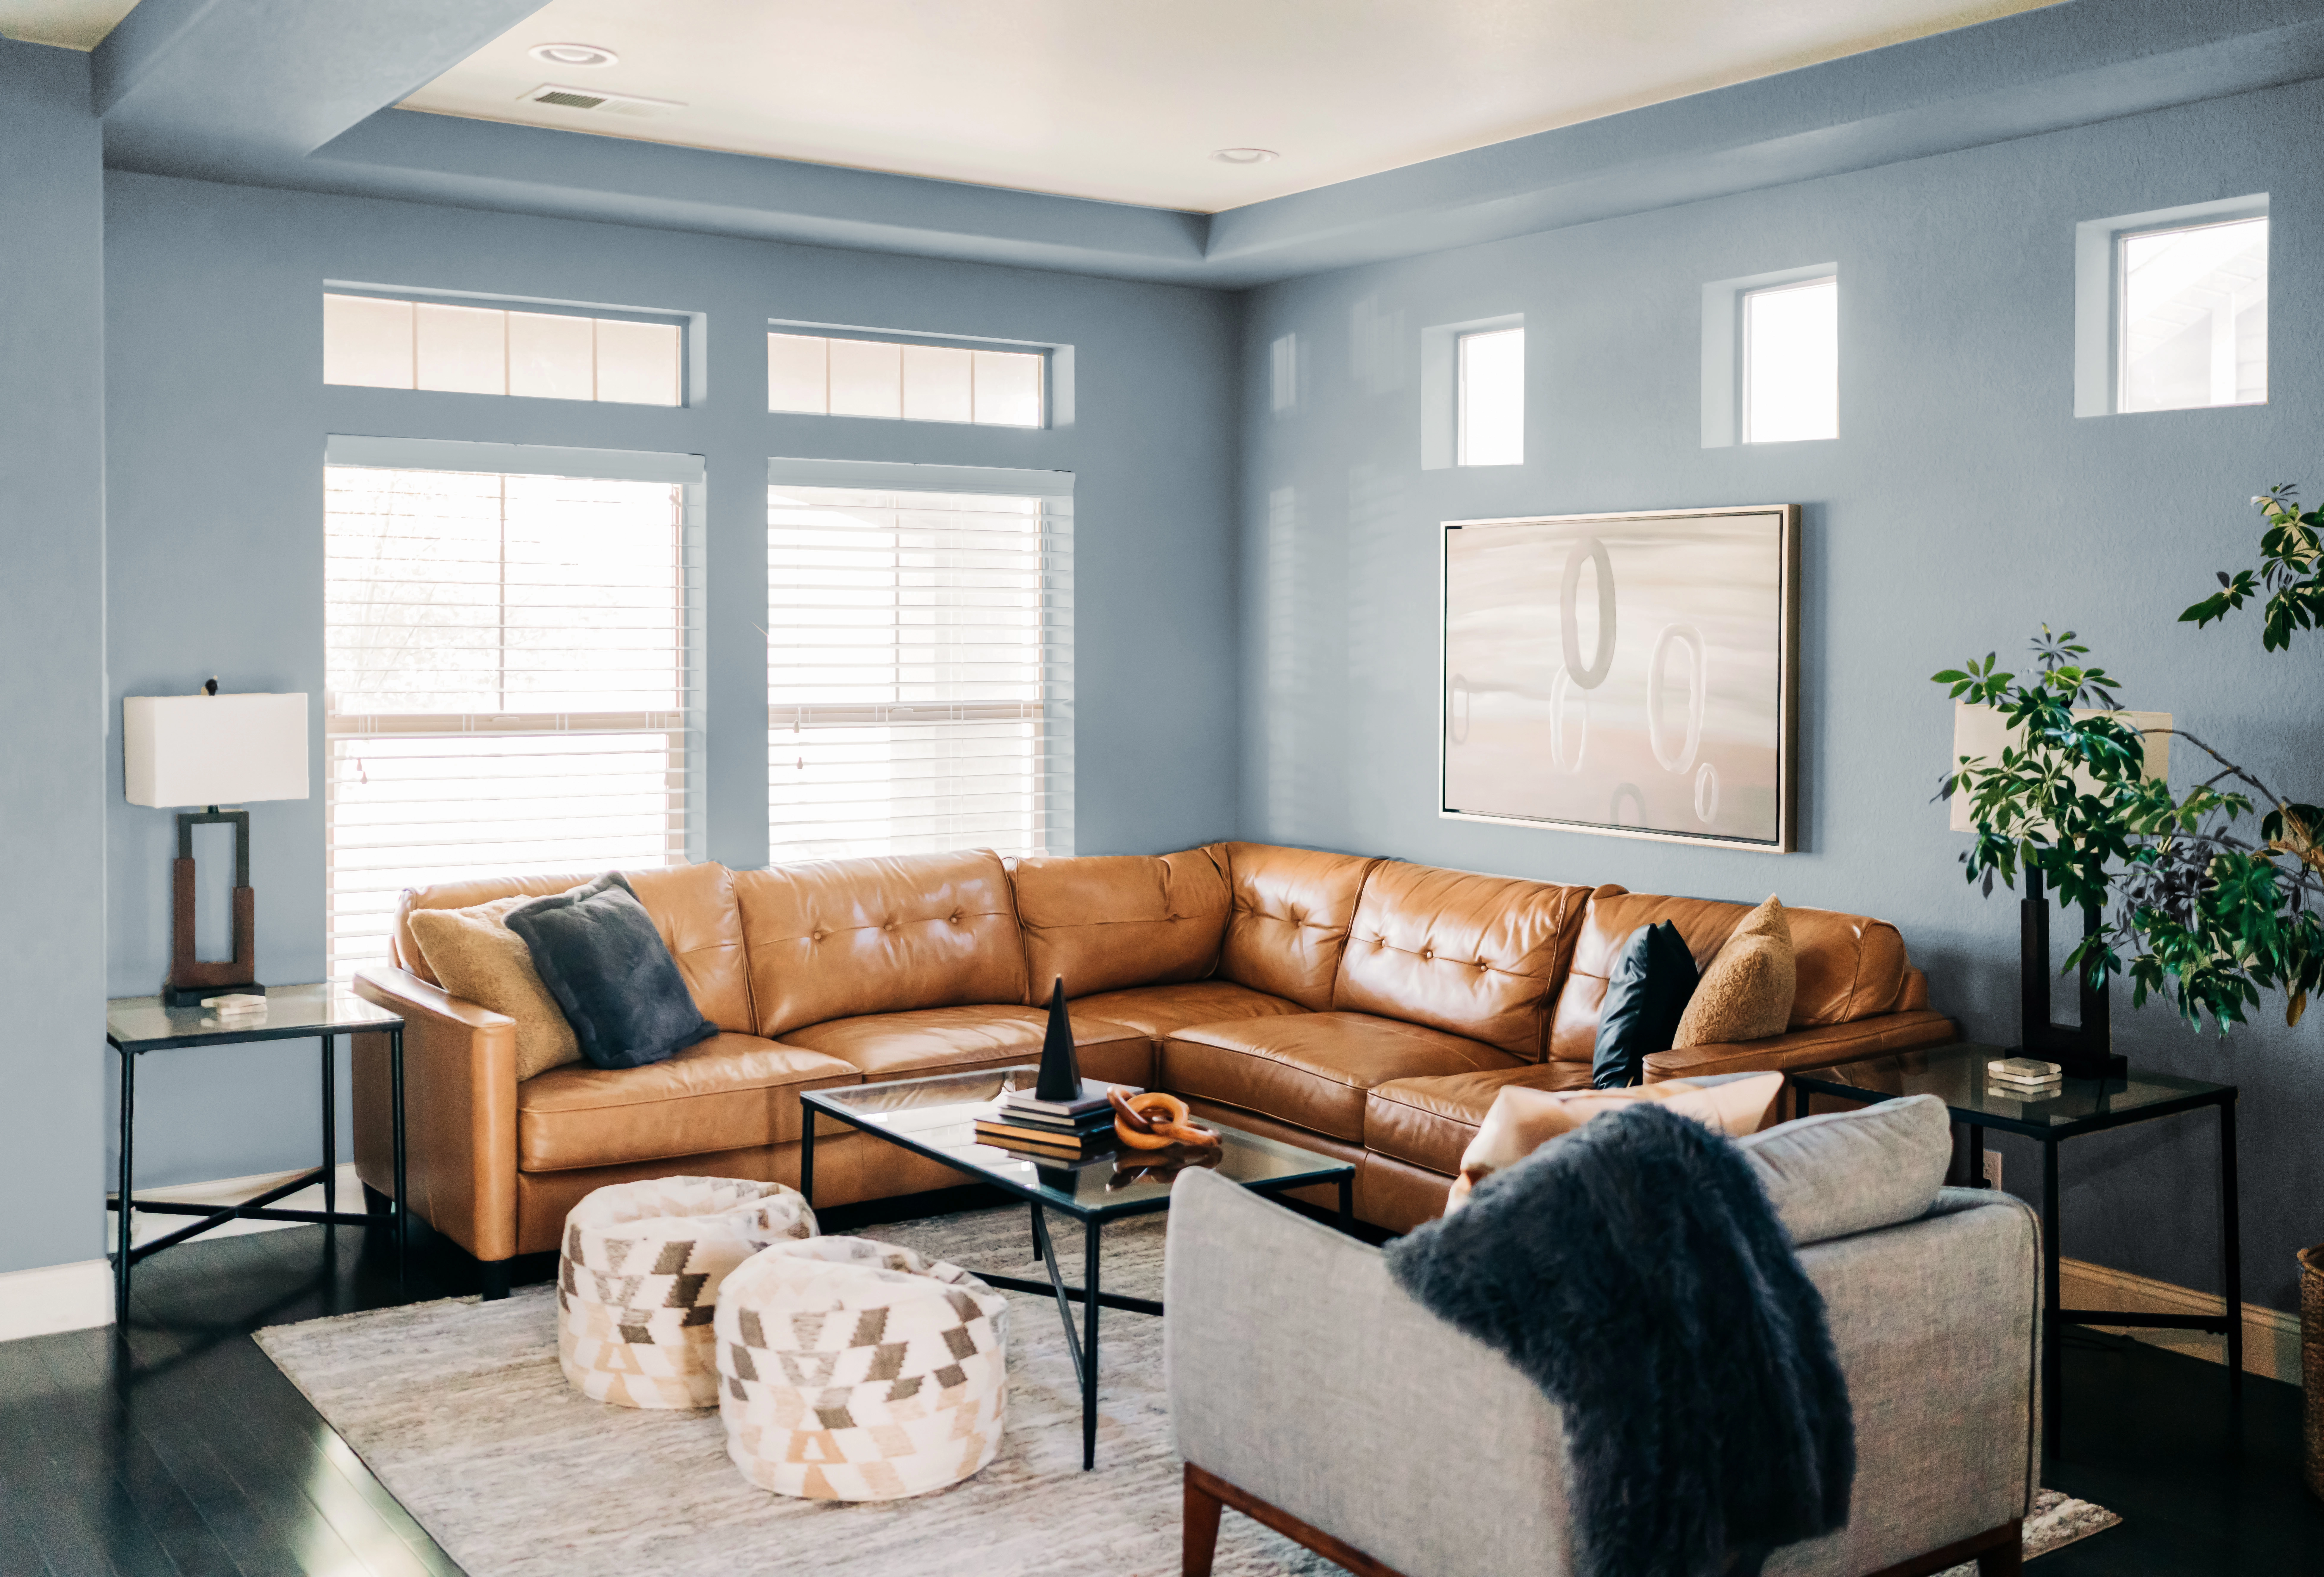 Modern boho style living room with light blue painted walls, a brown leather couch, neutral decor.